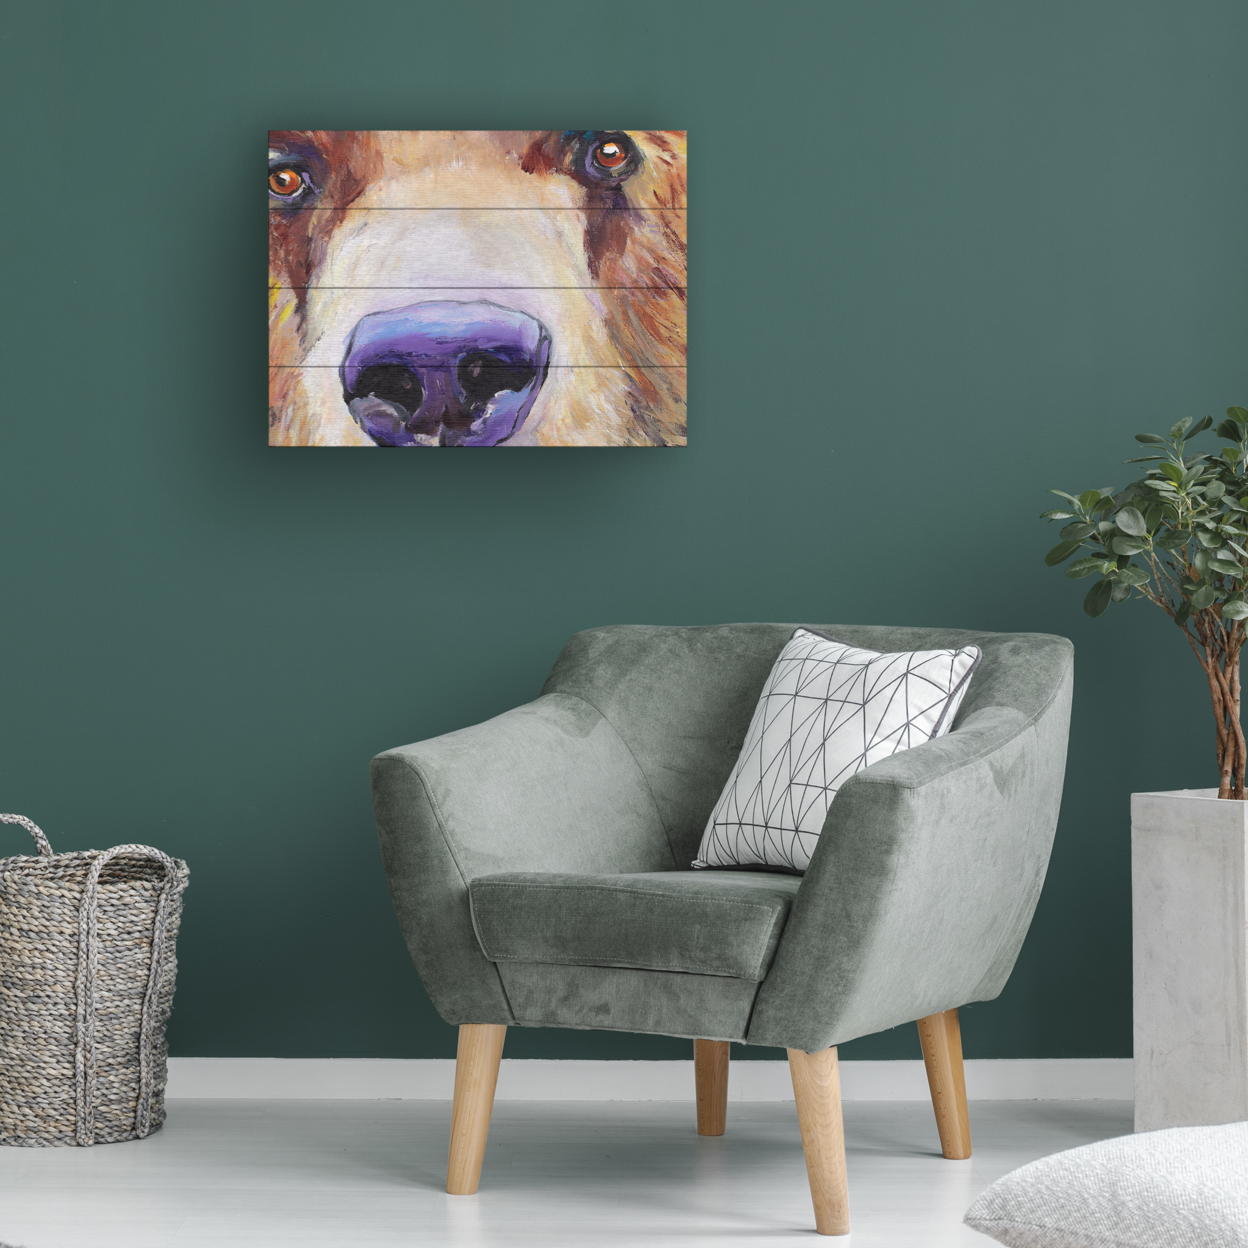 Wall Art 12 X 16 Inches Titled The Sniffer Ready To Hang Printed On Wooden Planks